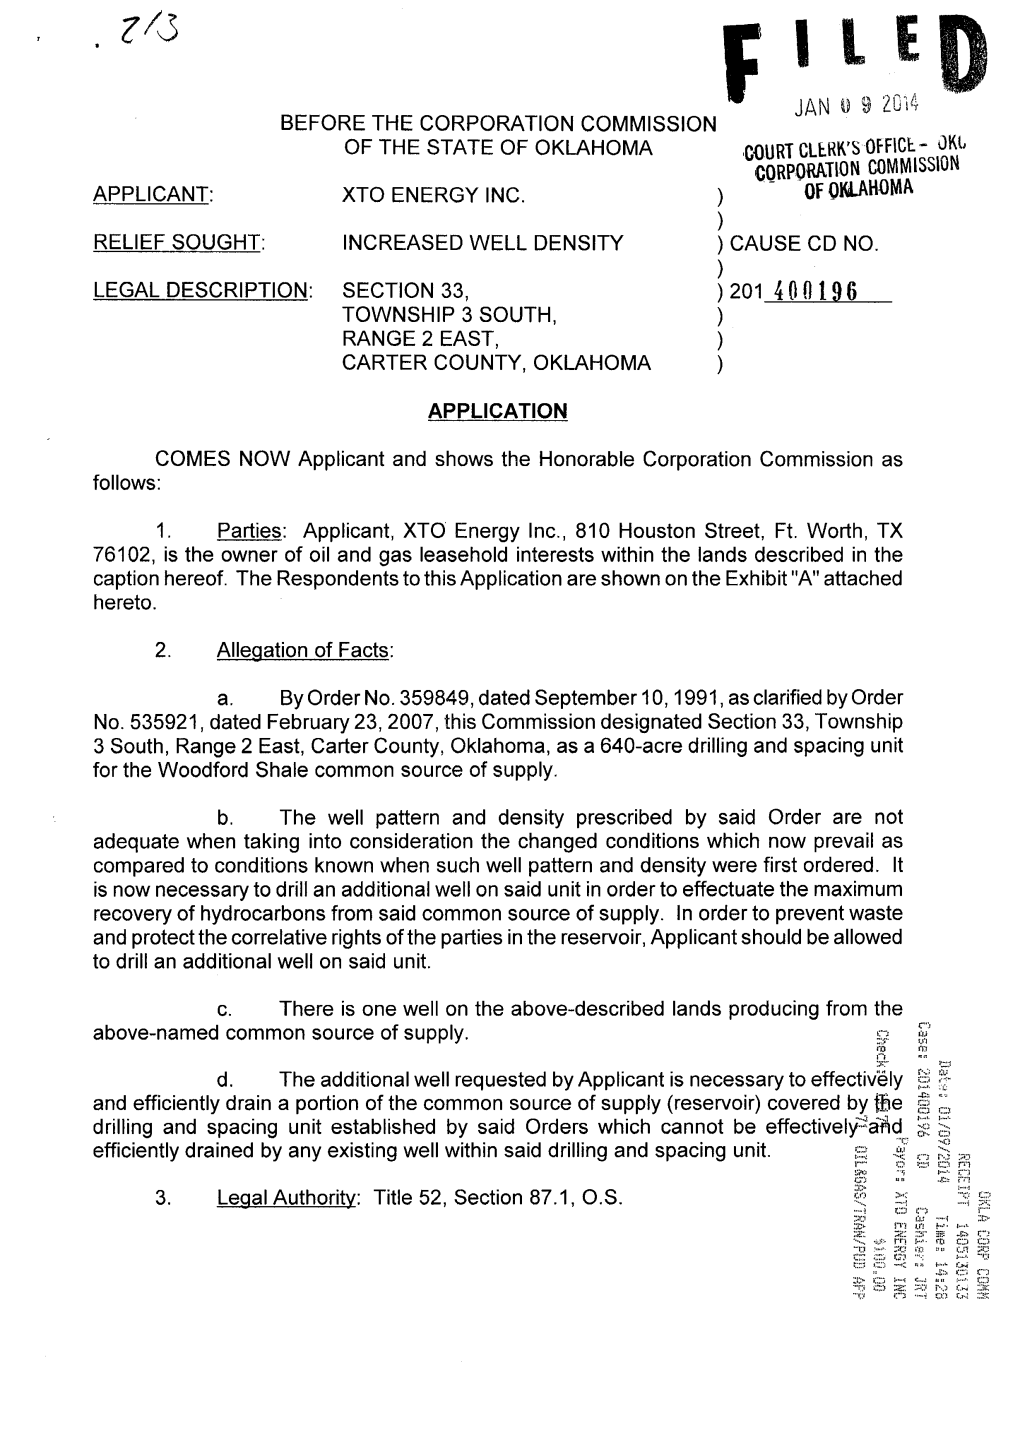 Filed Jan U 9 Zg4 Before the Corporation Commission of the State of Oklahoma Court Clerk's Office Oku Corporation Commission Applicant: Xto Energy Inc